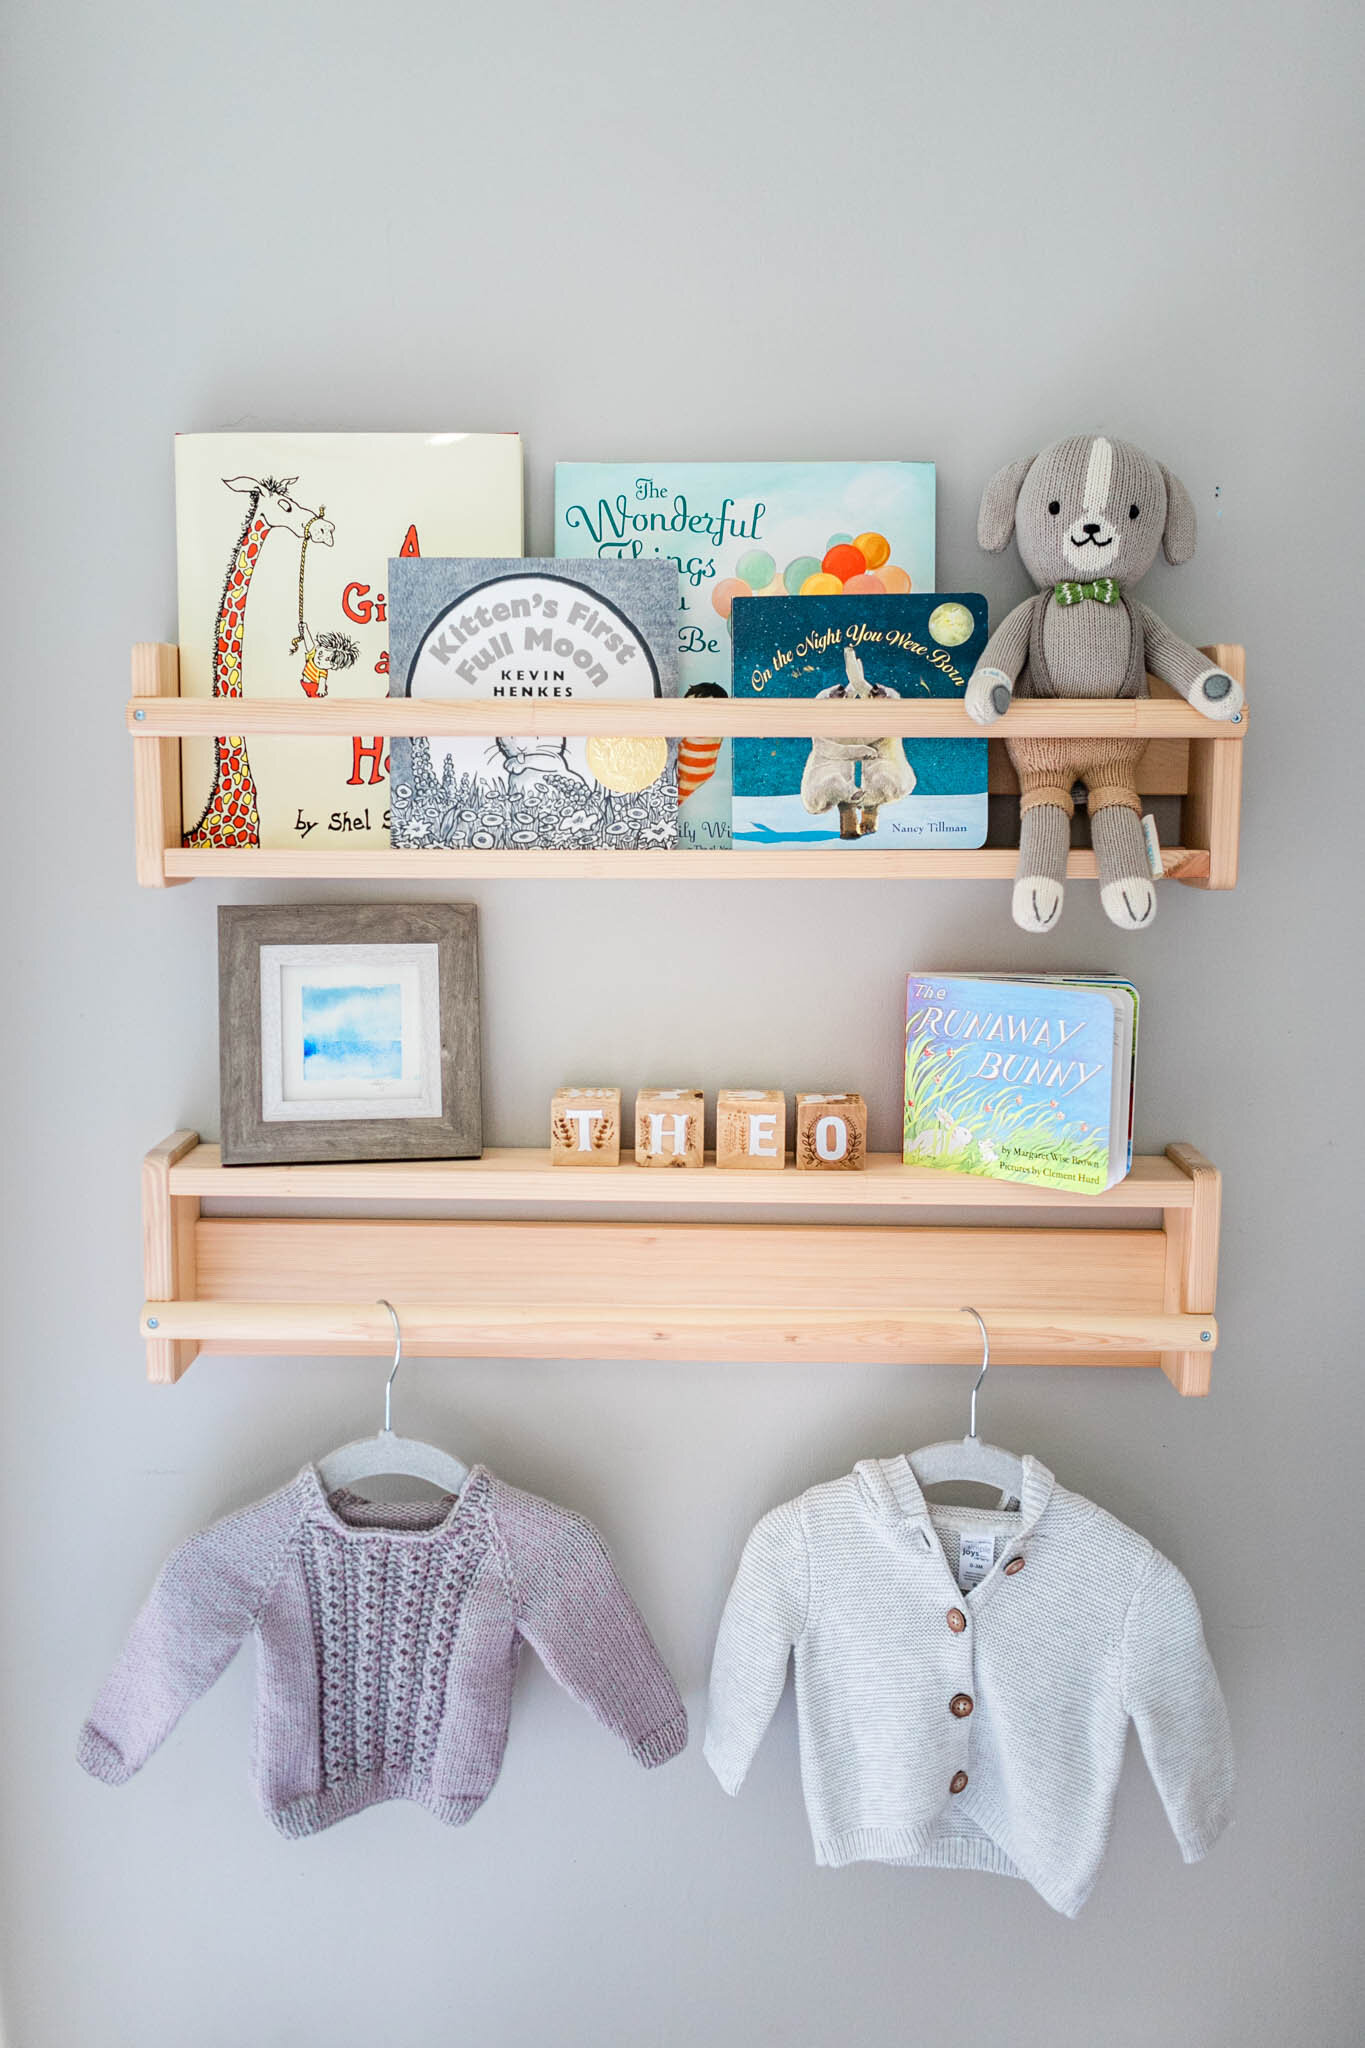 Books and baby clothing hung on the wall | Lifestyle newborn photography at home | Greensboro Newborn Photographer | By G. Lin Photography